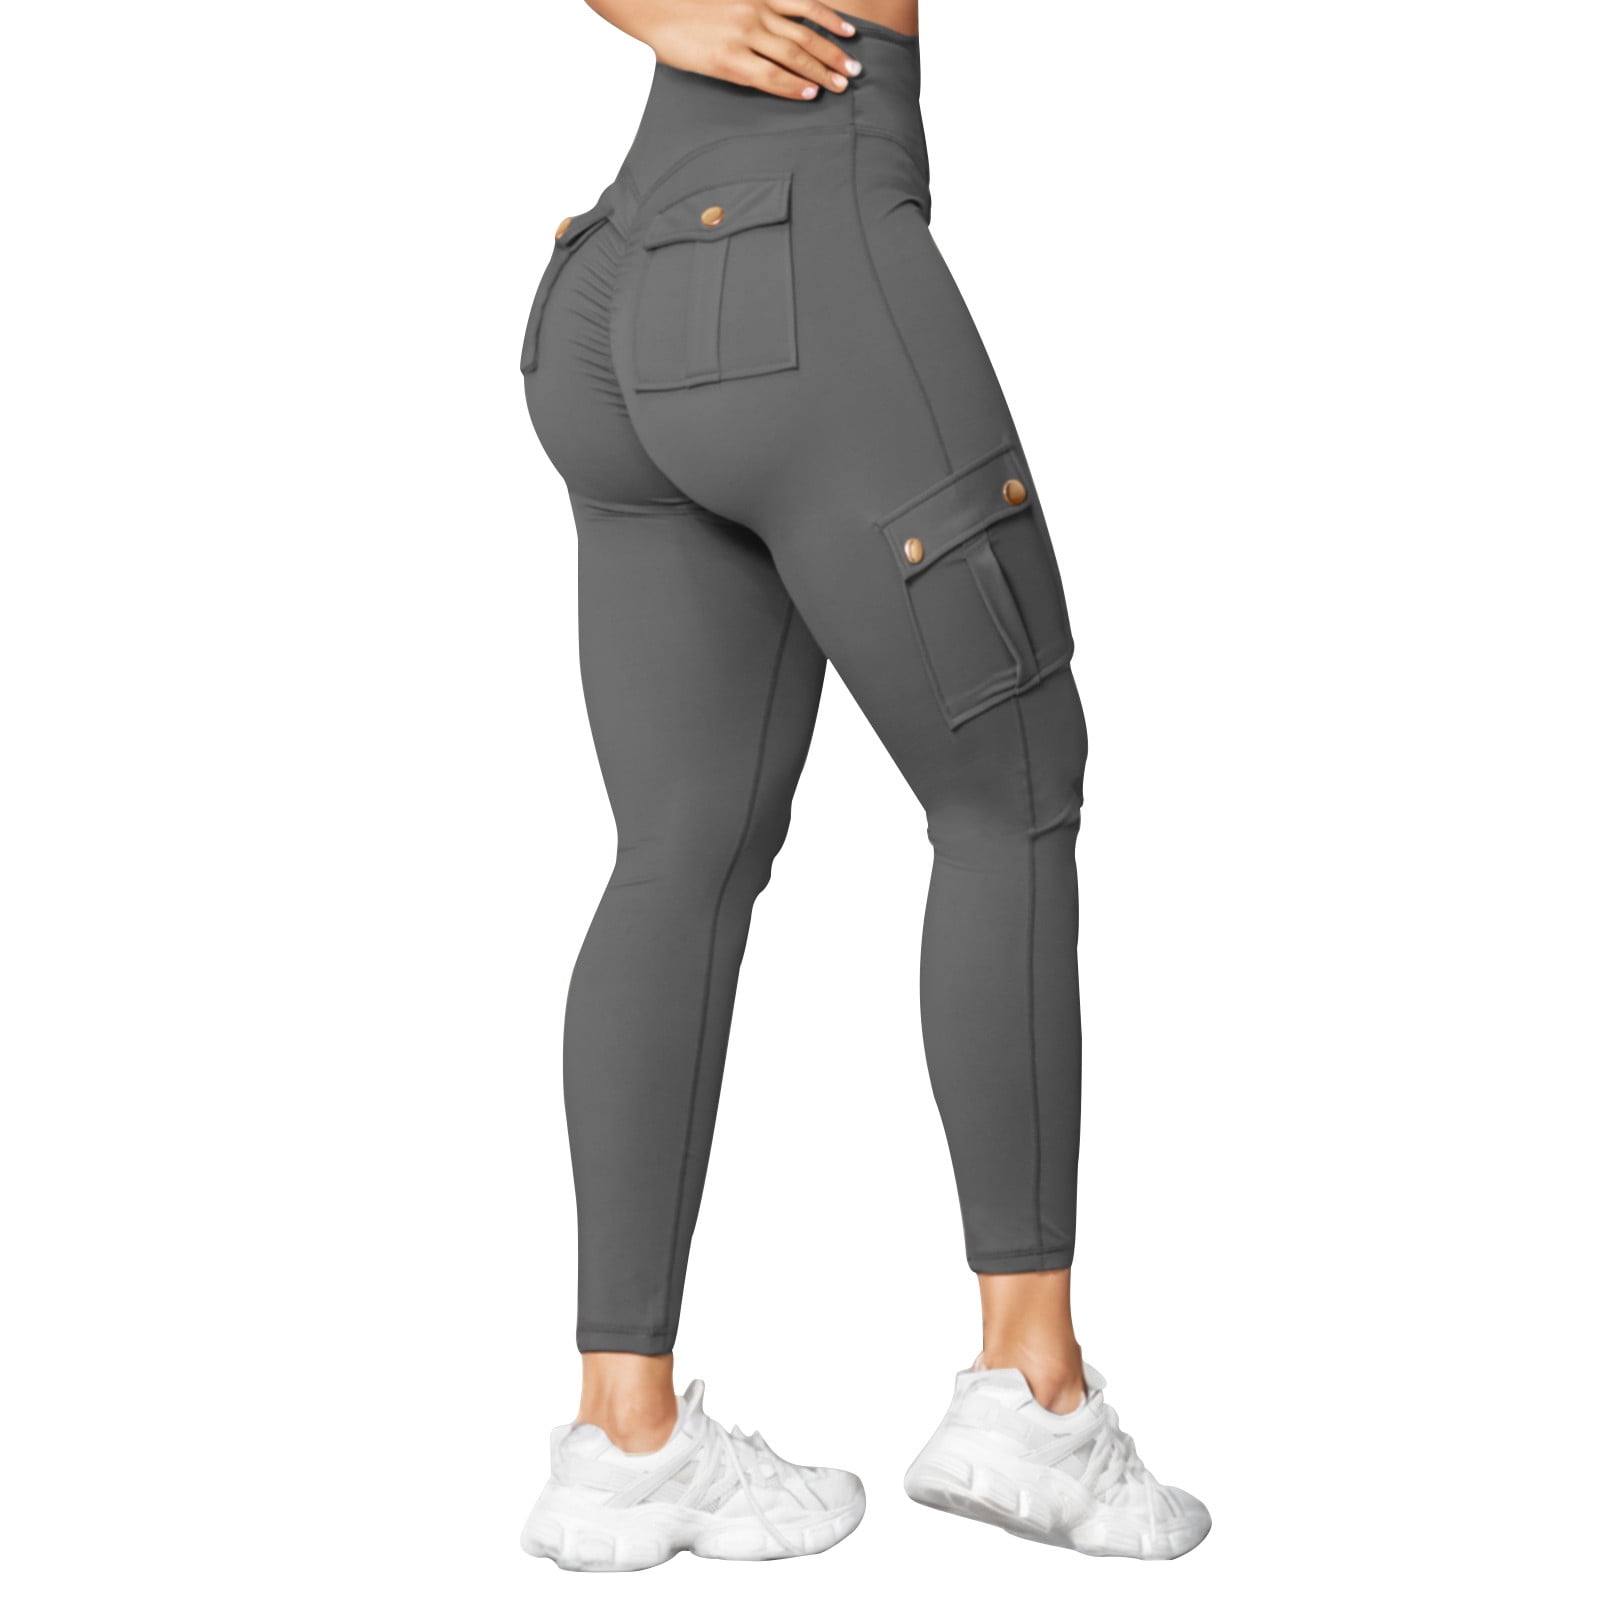 Baocc Yoga Pants with Pockets for Women High Waisted Leggings for